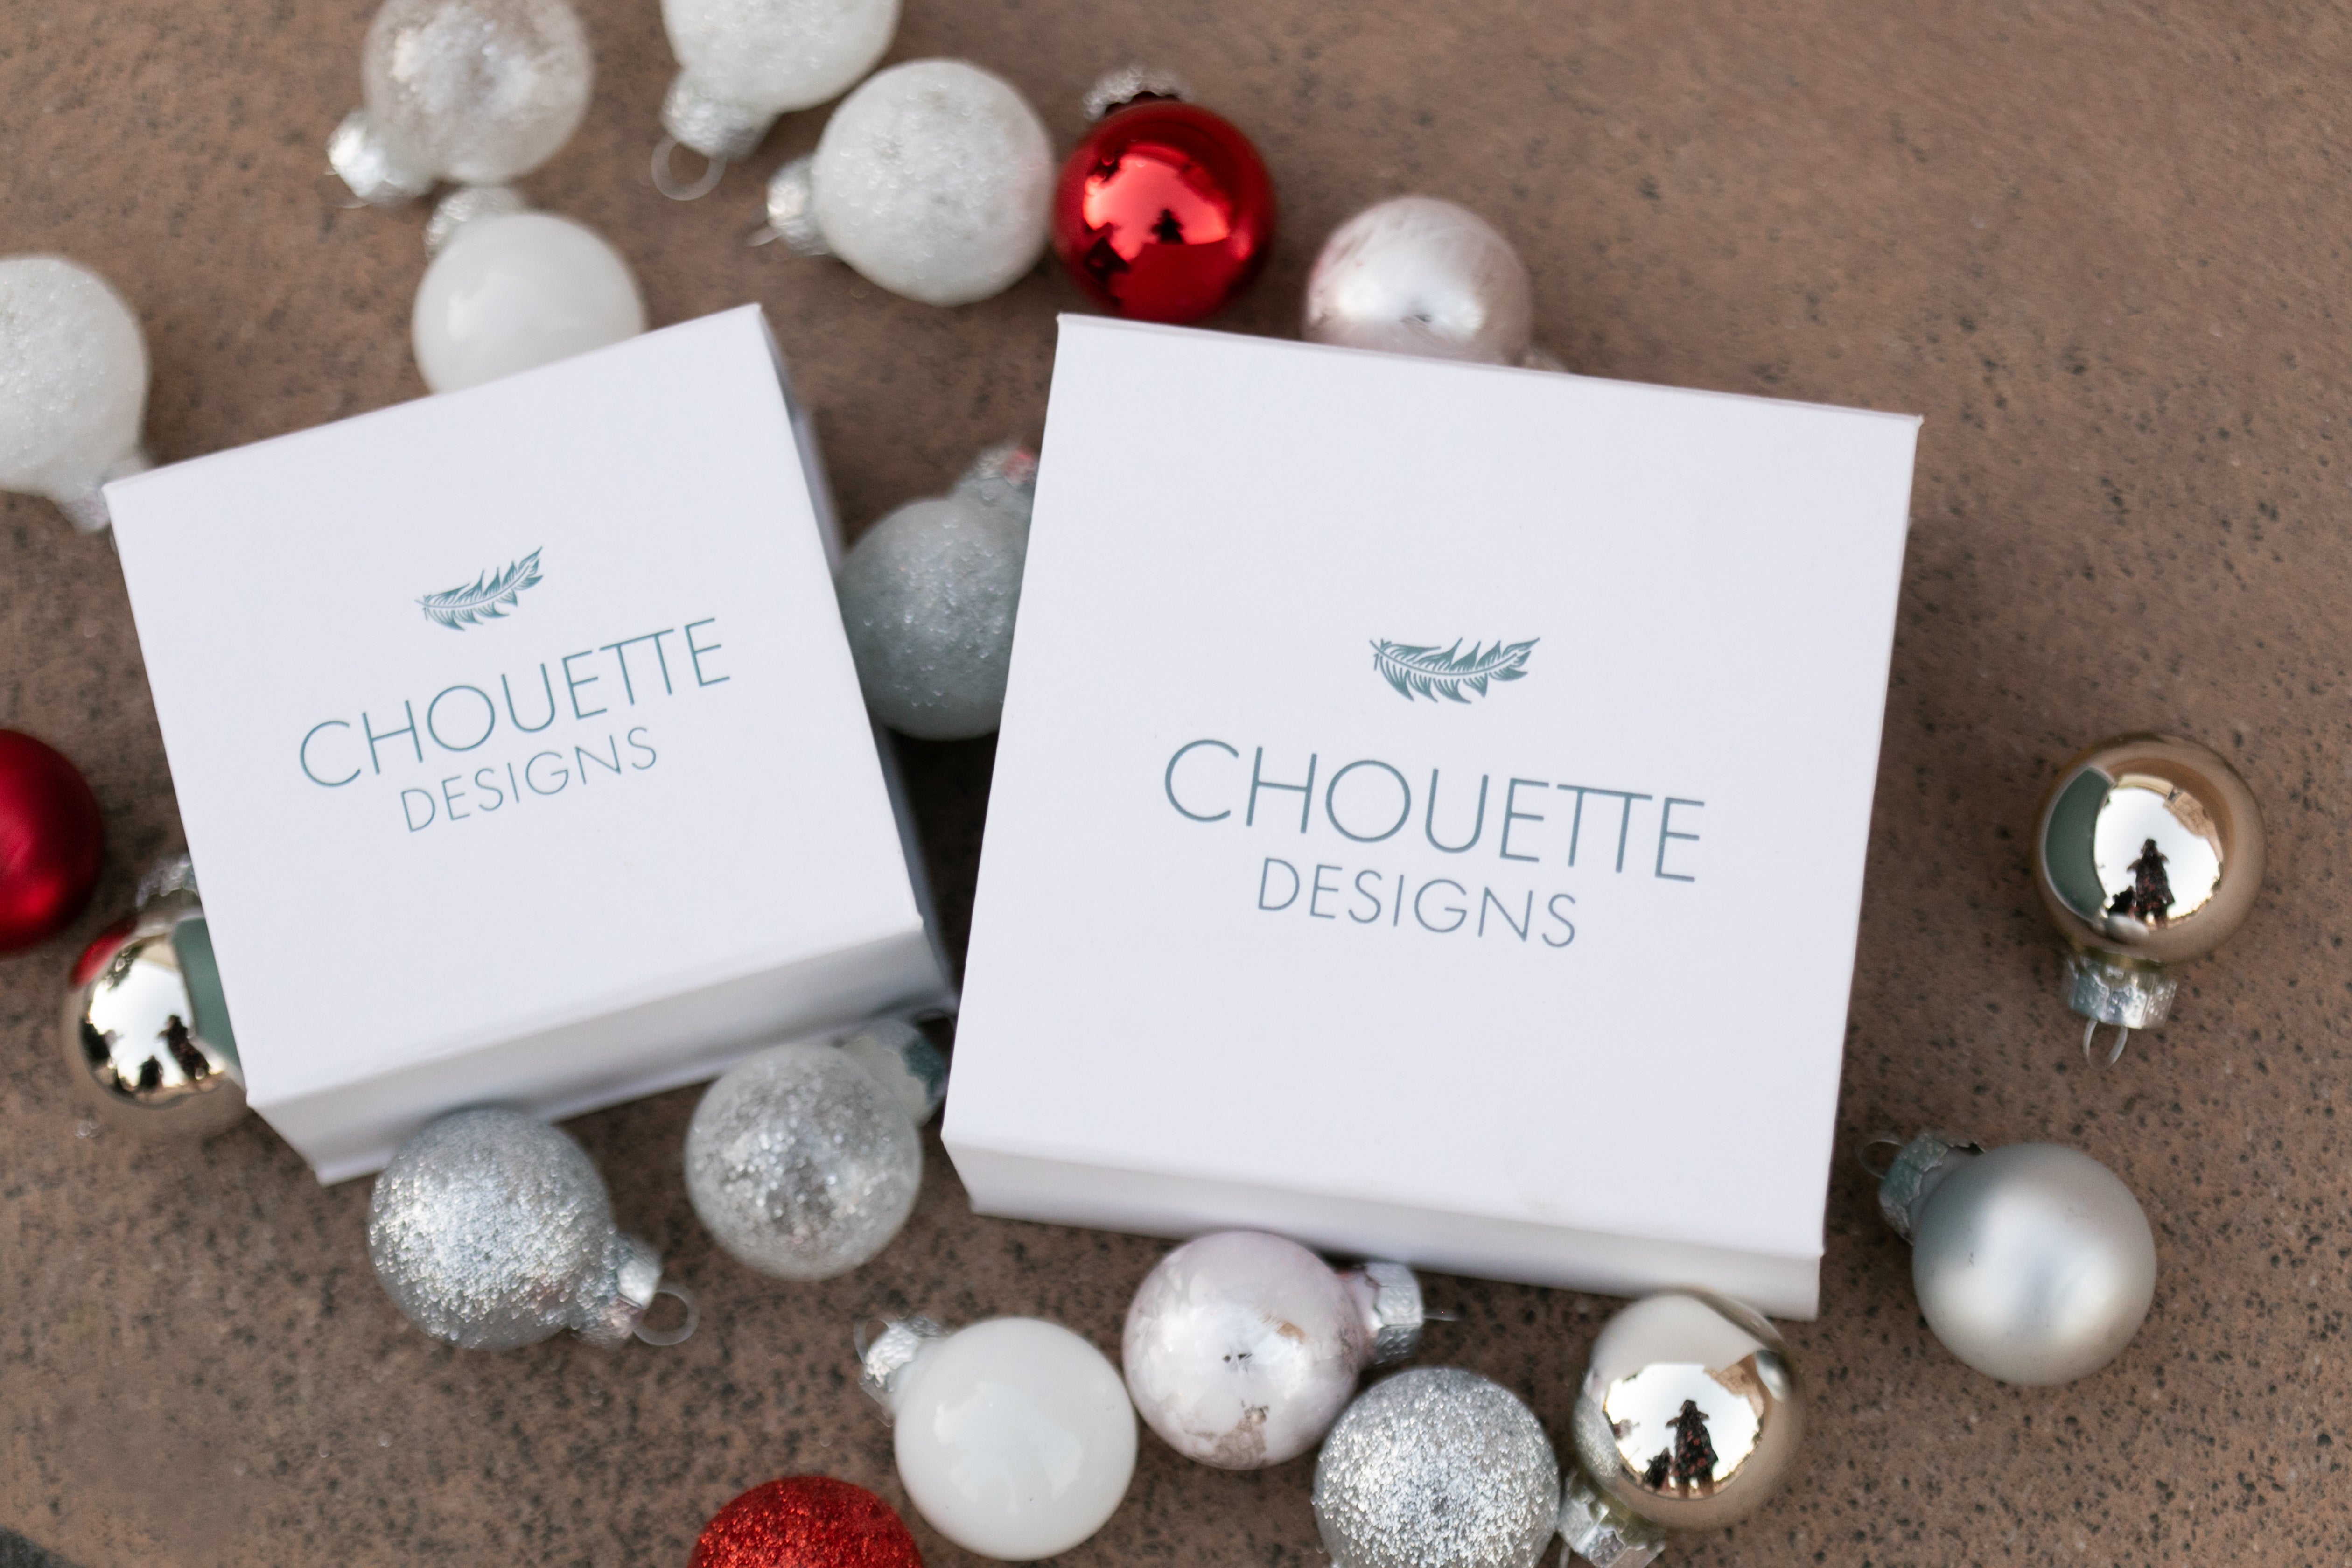 Two Chouette Designs branded jewelry boxes placed among red, white and silver Christmas ornaments.